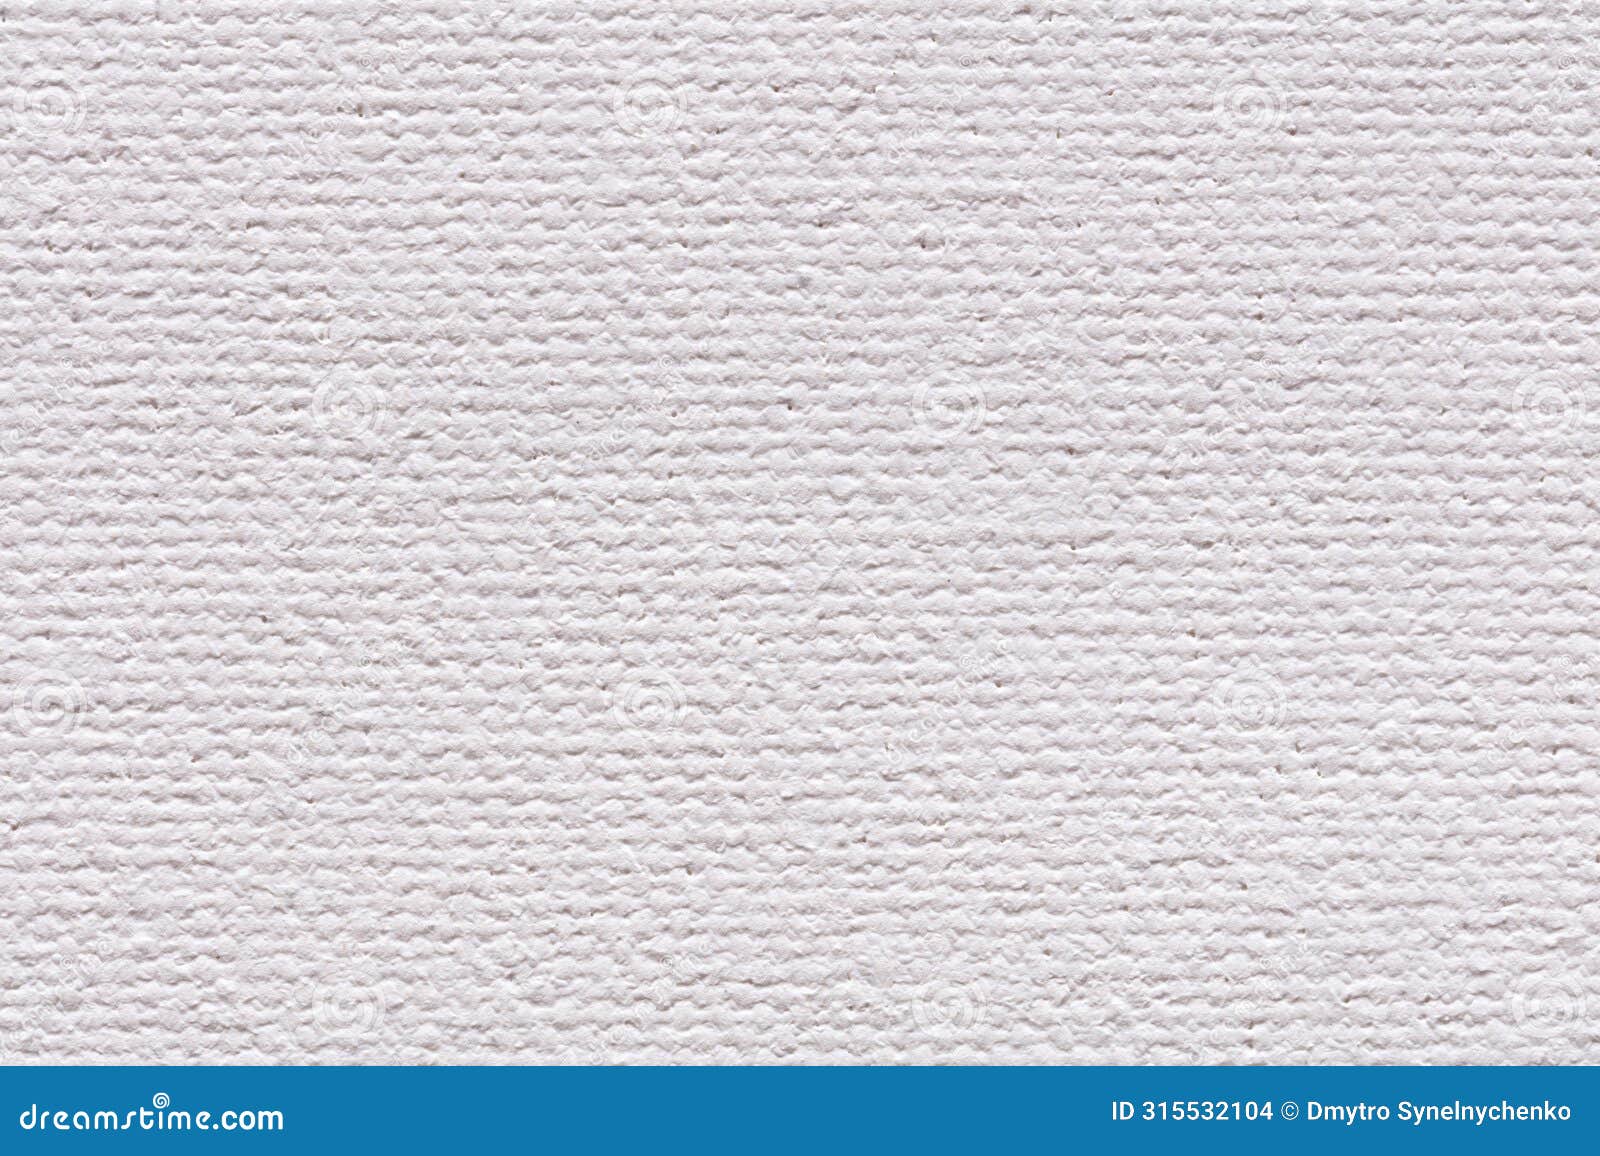 cotton canvas background for perfect creative work in classic style.